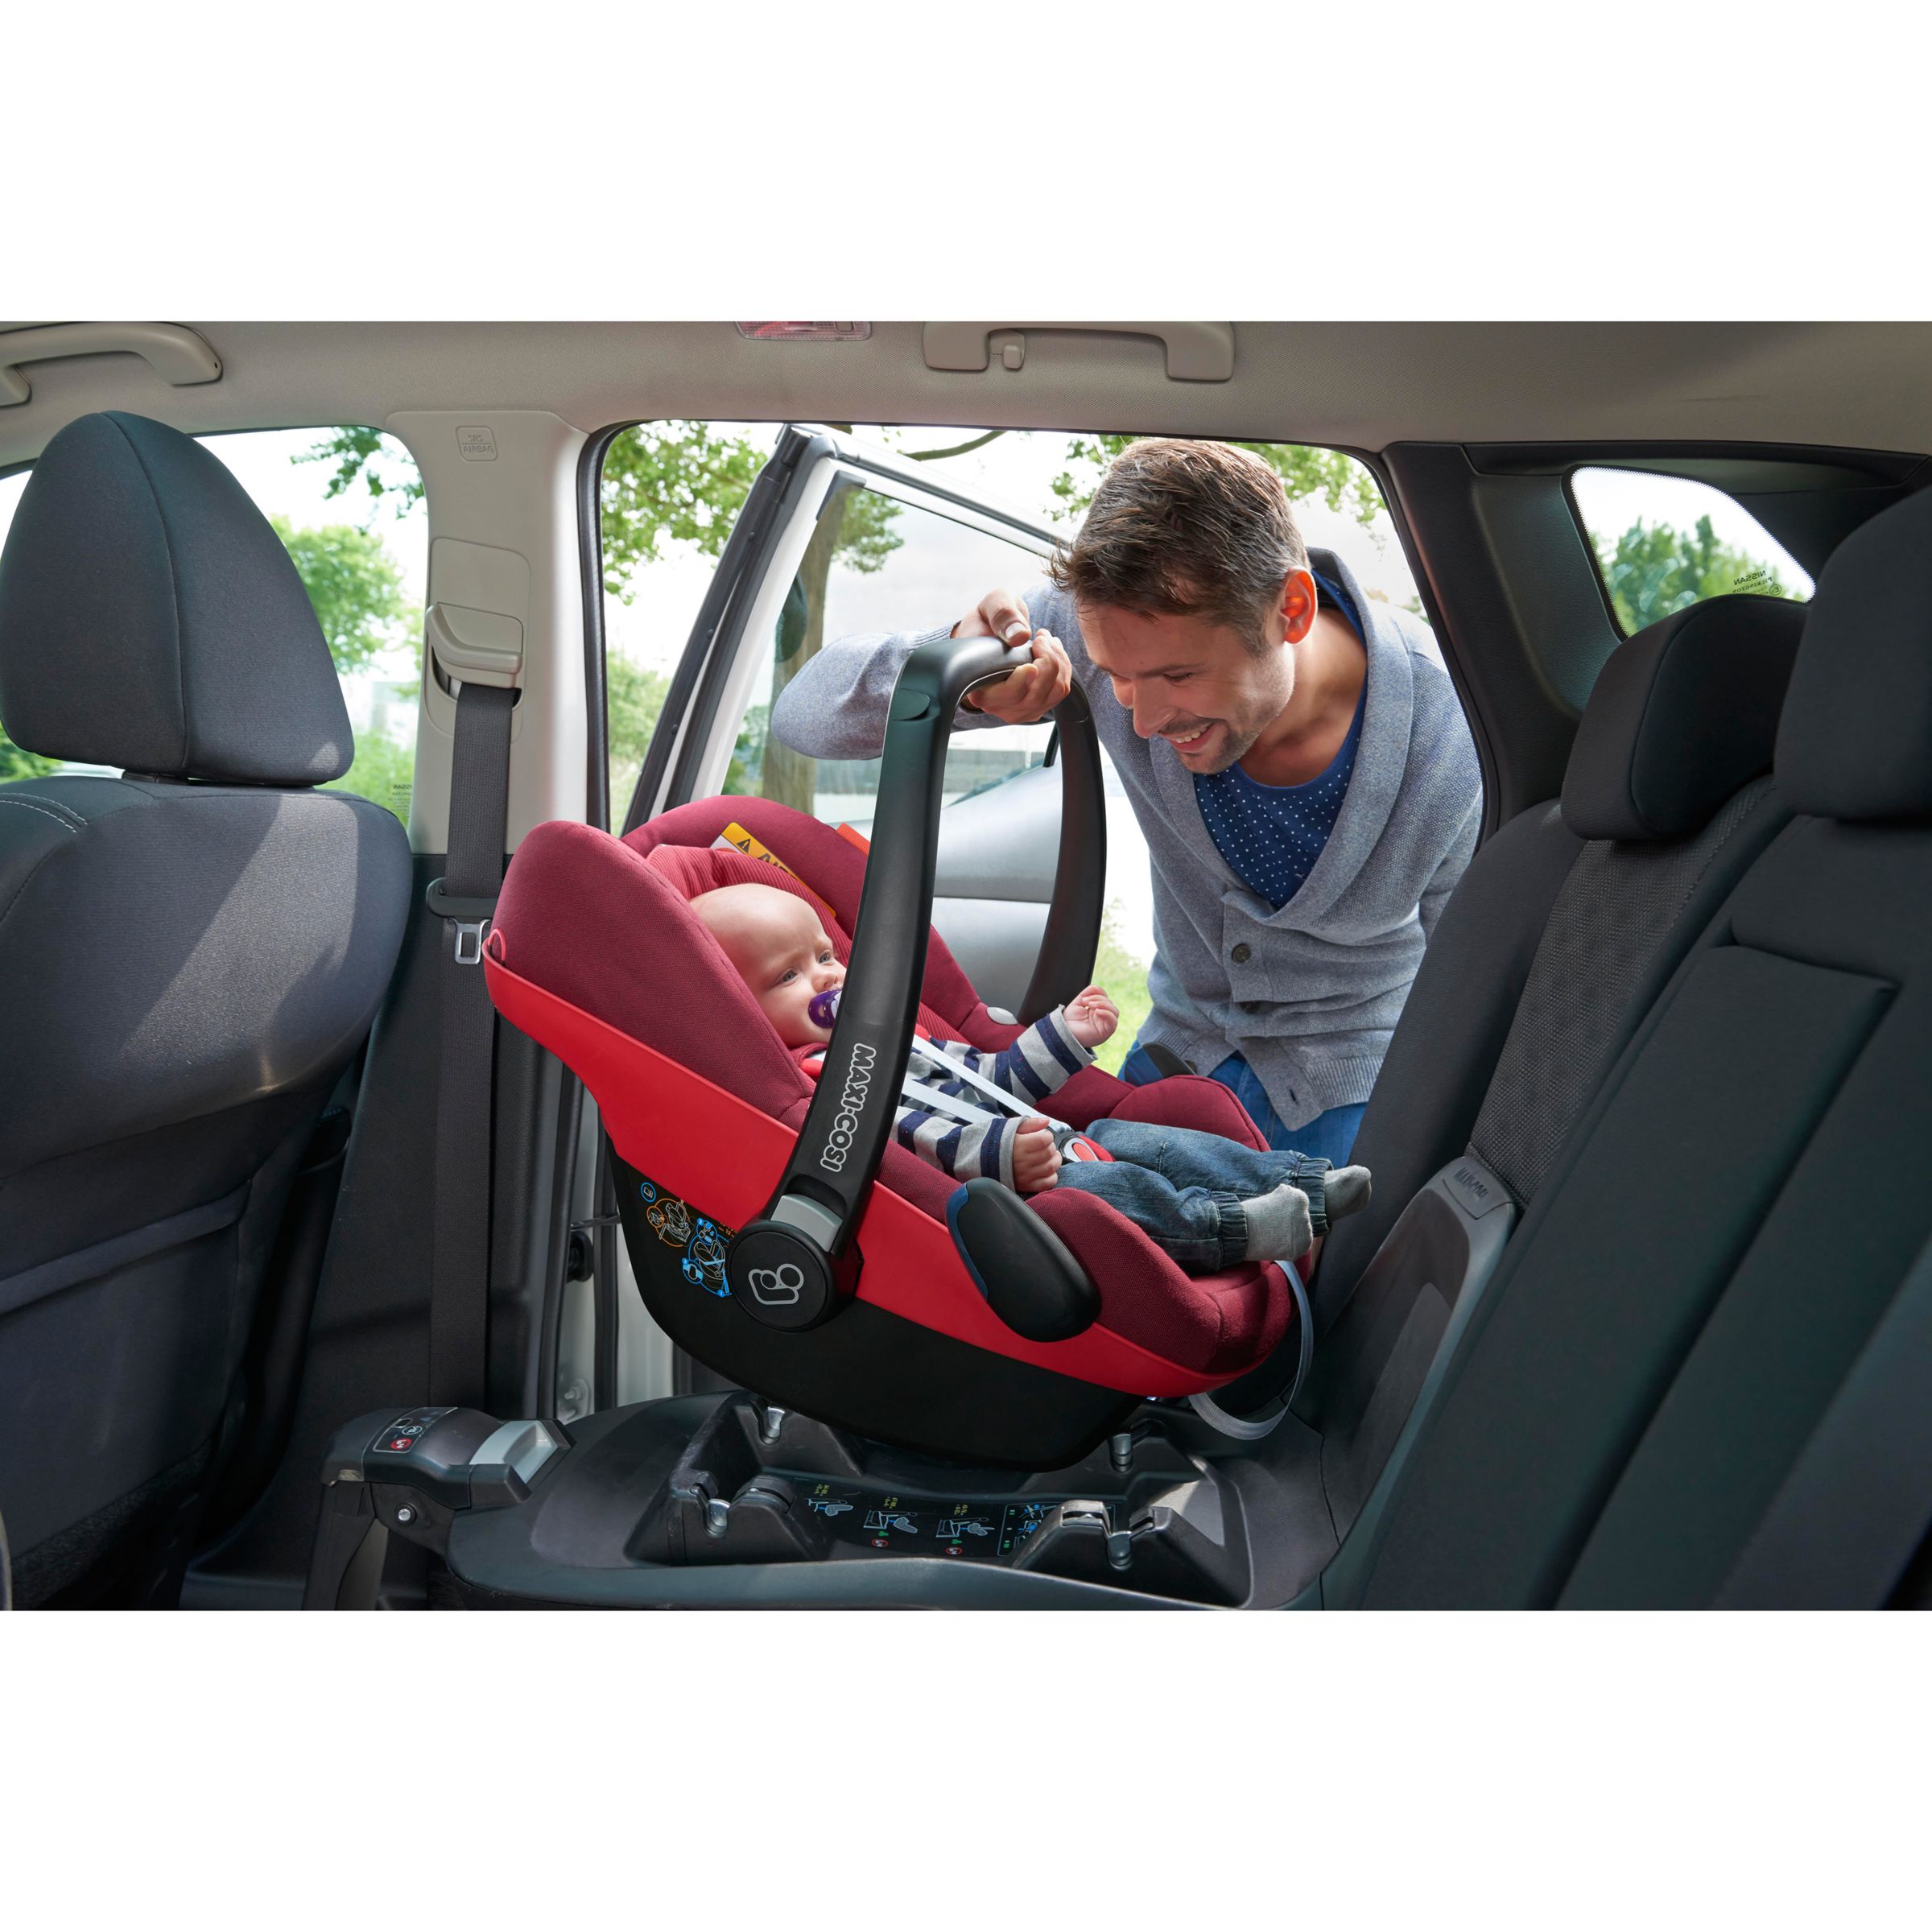 what is isofix base